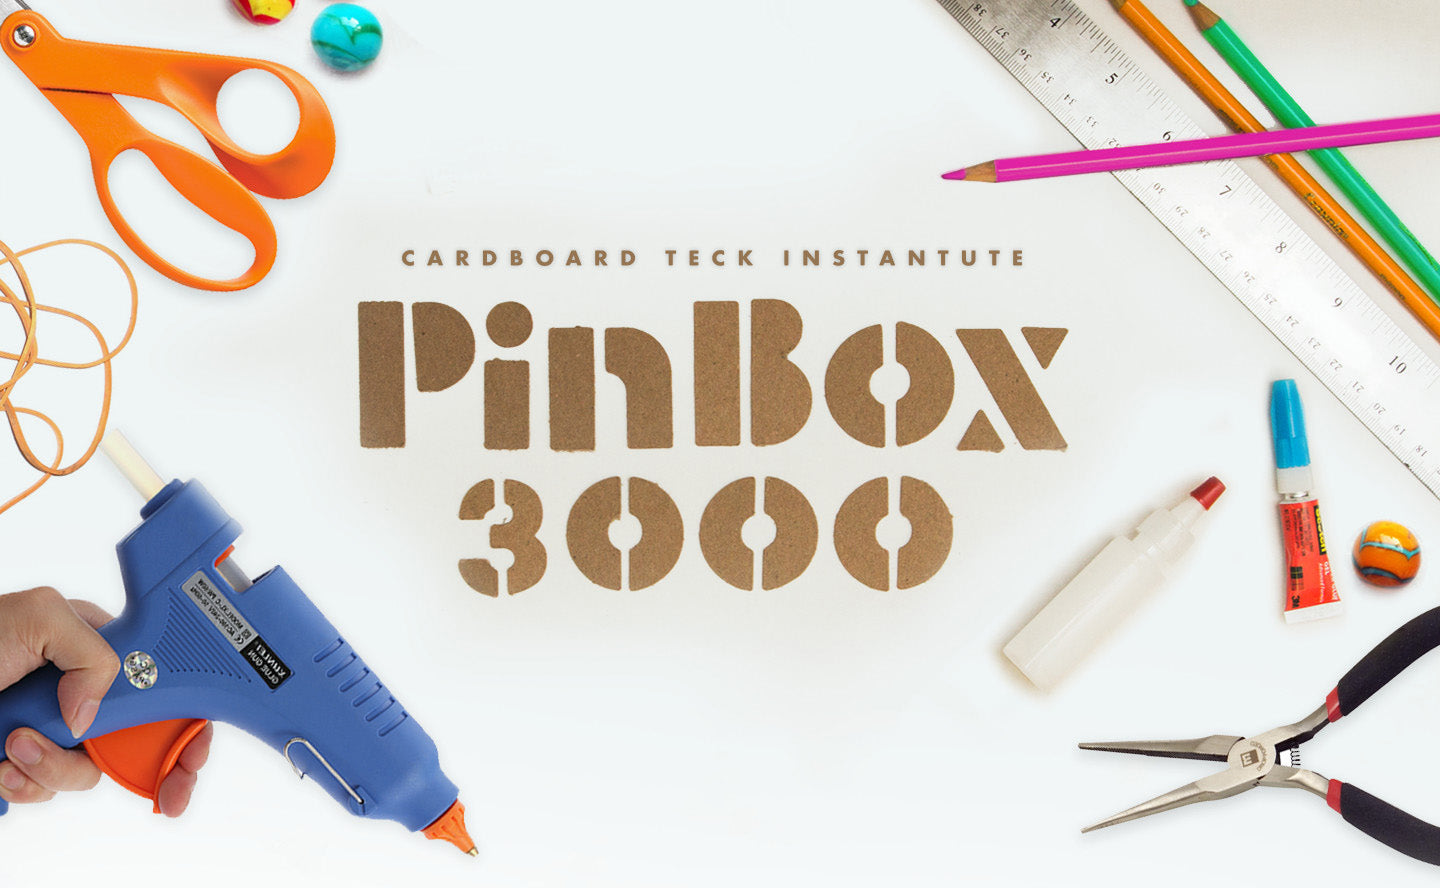 playboards for your pinbox 3000